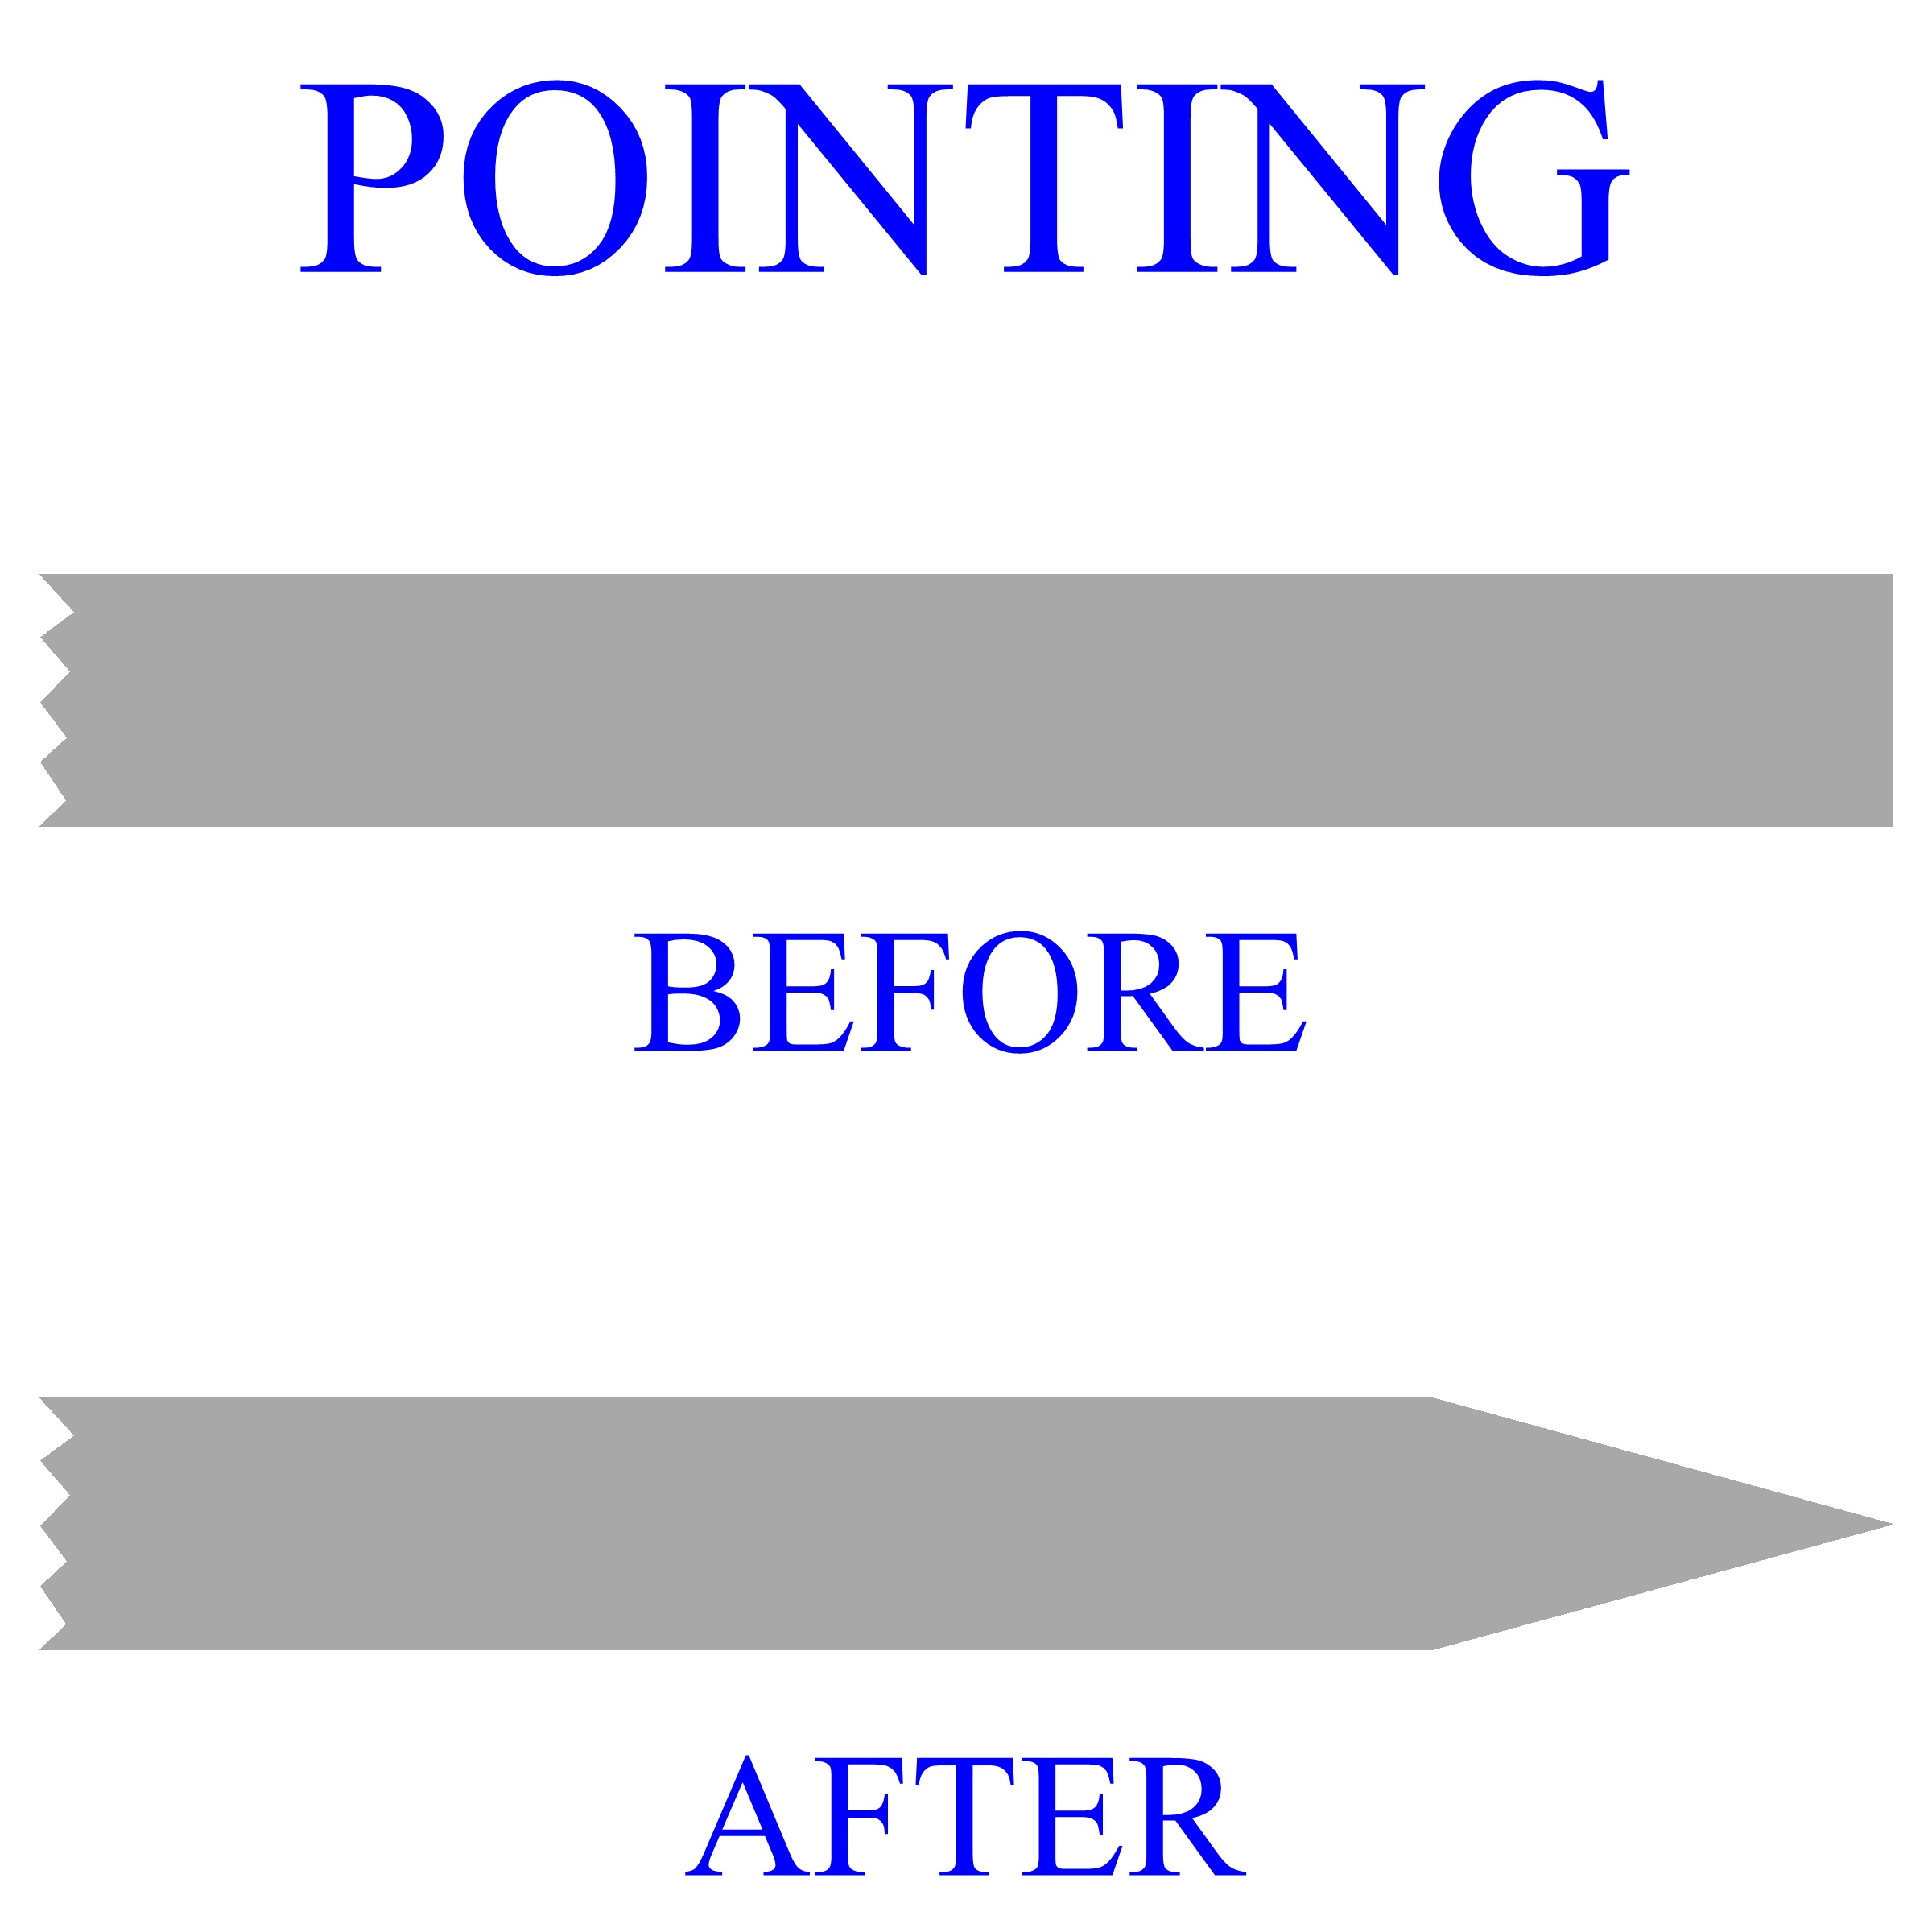 Pointing, Before and After